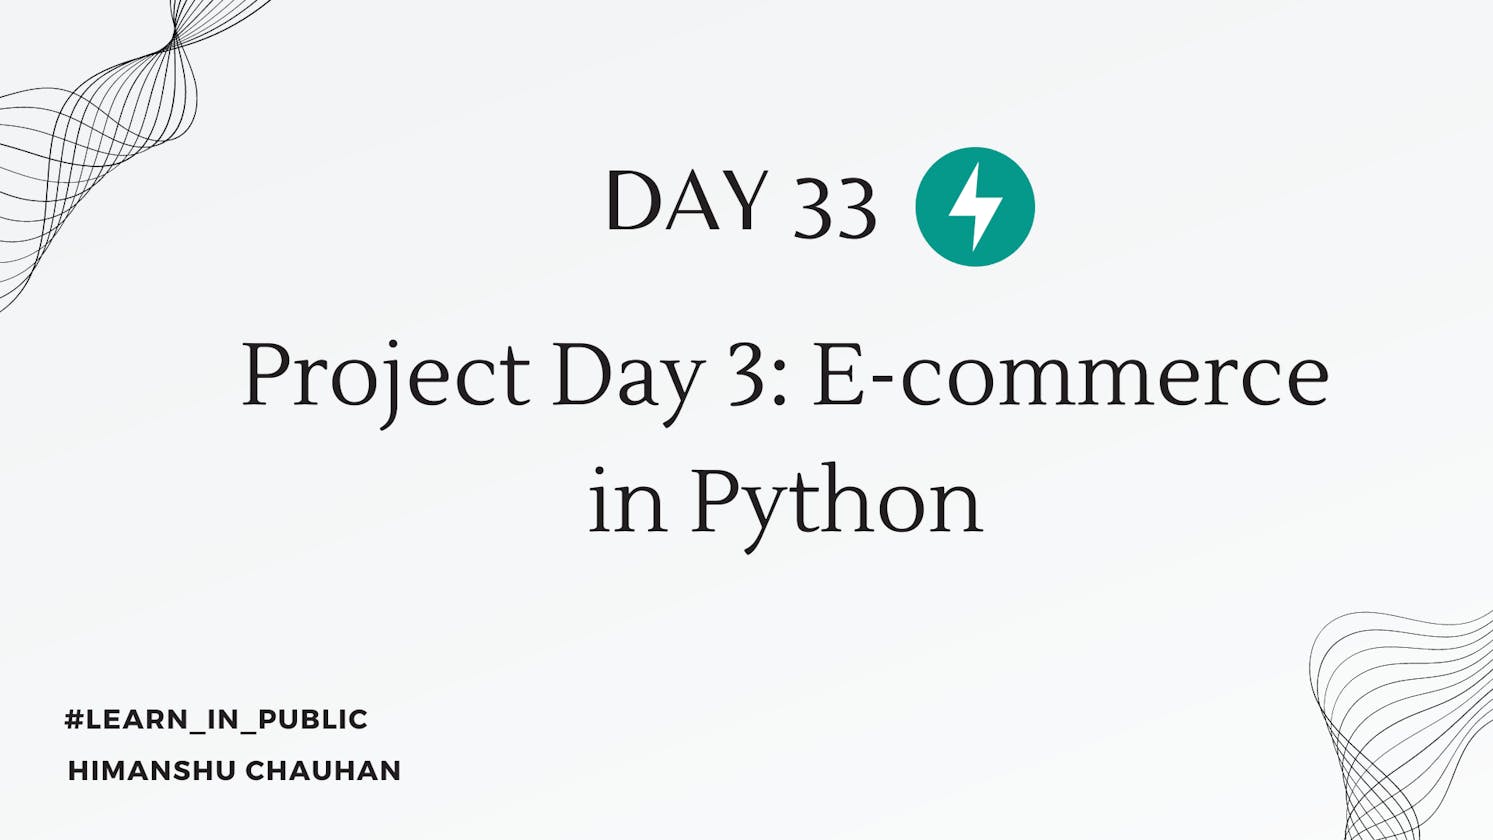 Day 33: E-commerce project day 3